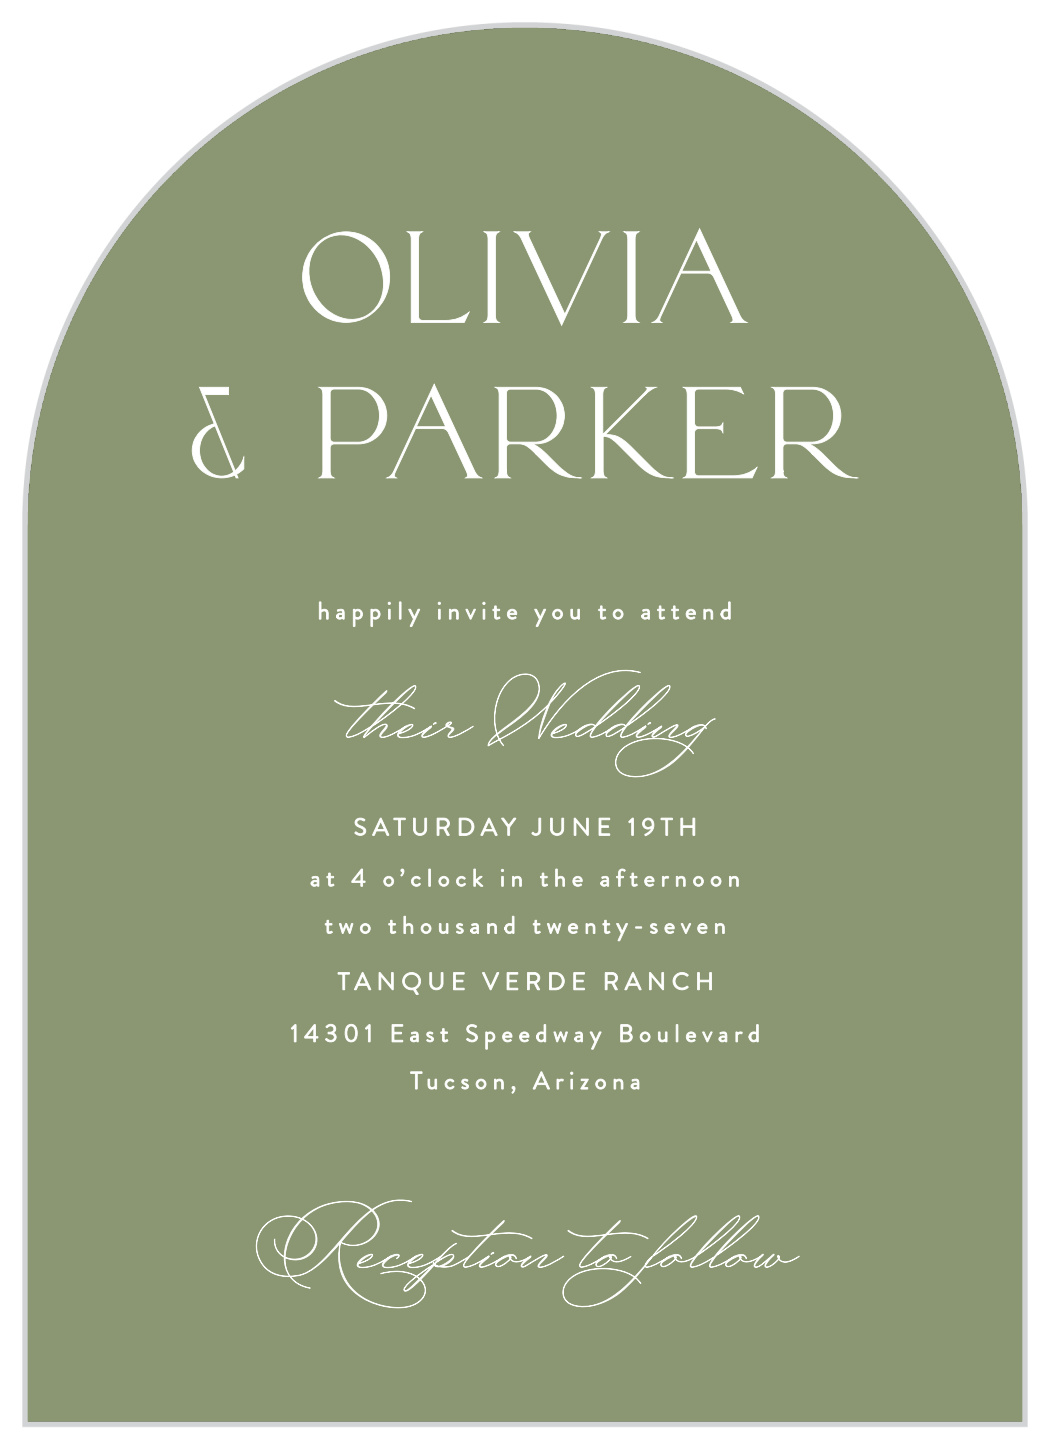 Painted Tile Wedding Arch Invitations